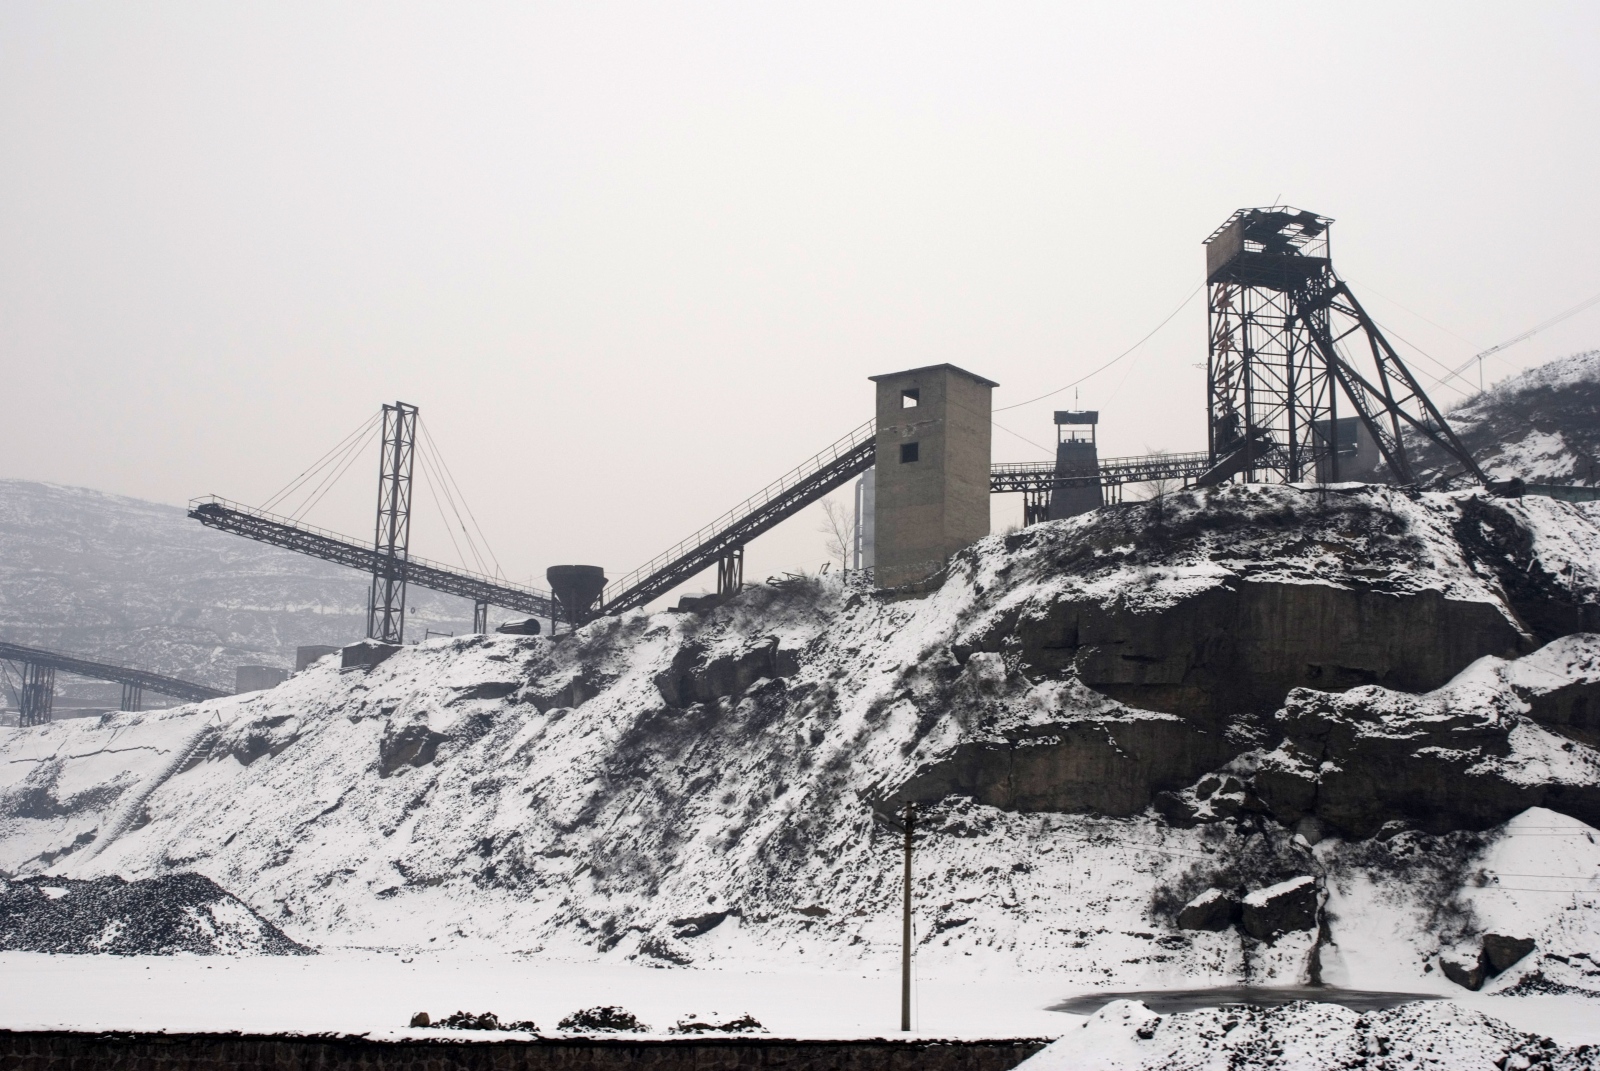 THE LOST VALLEY - North China. Shanxi Province. Coal-mining area.